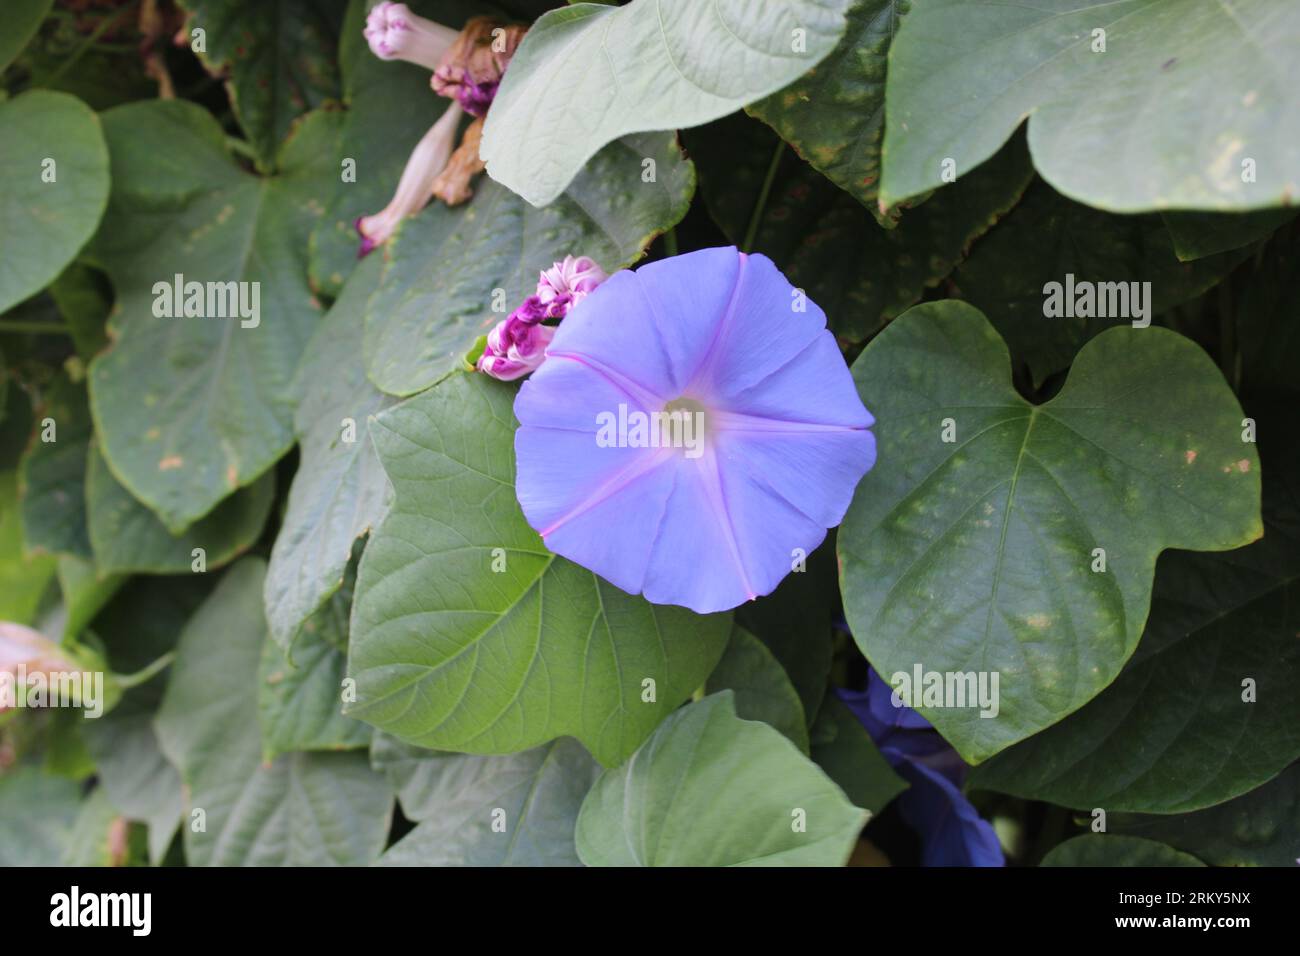 Ipomoea tricolor, the Mexican morning glory or just morning glory, is a species of flowering plant in the family Convolvulaceae,. High quality photo Stock Photo